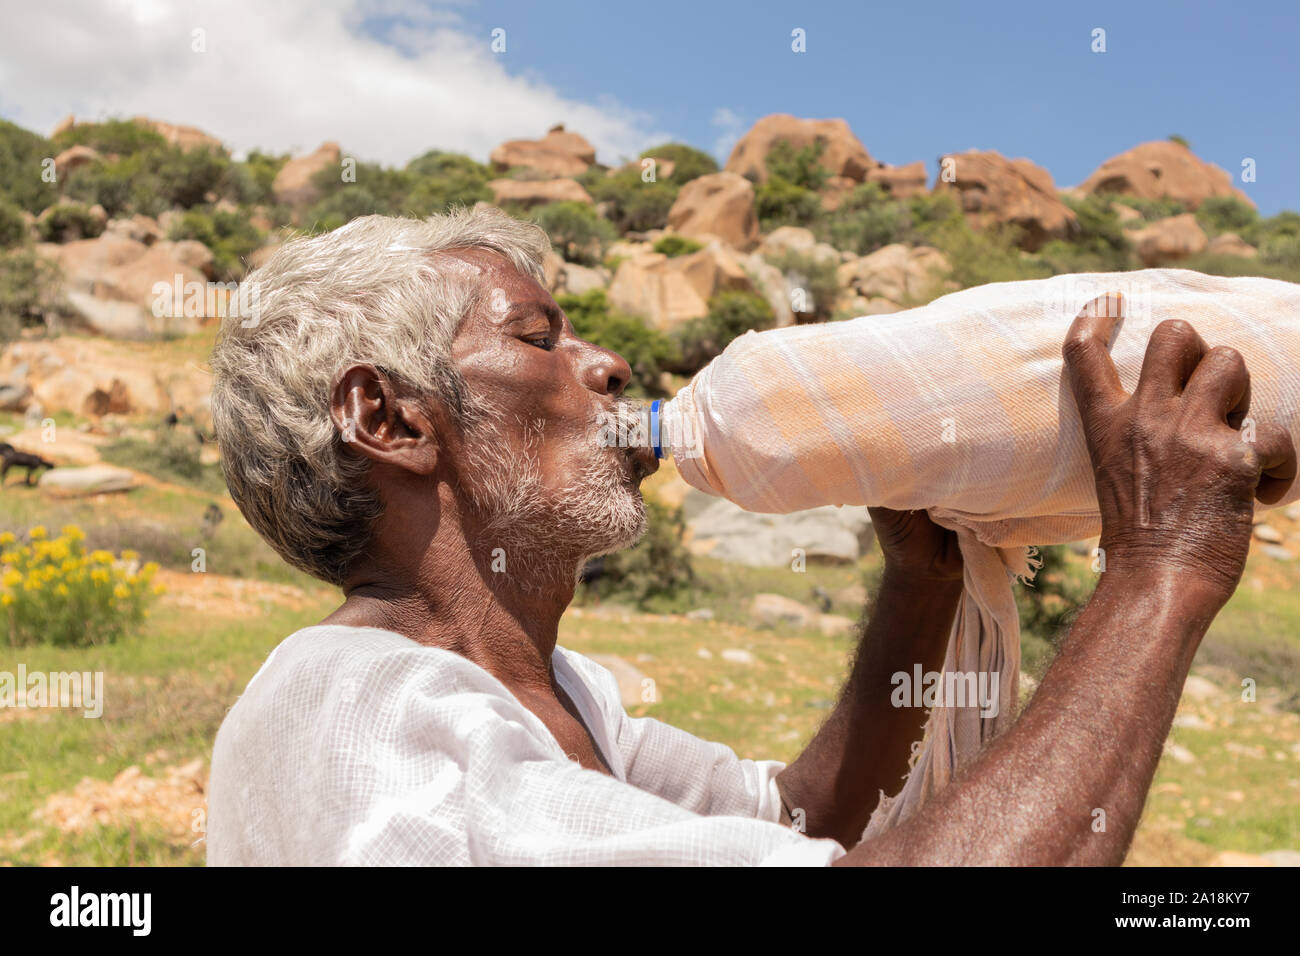 Maski, India 21 September, 2019 : Close up of Thirsty farmer man drinking water from plastic bottle covered with cloth for cooling during hot sunny Stock Photo